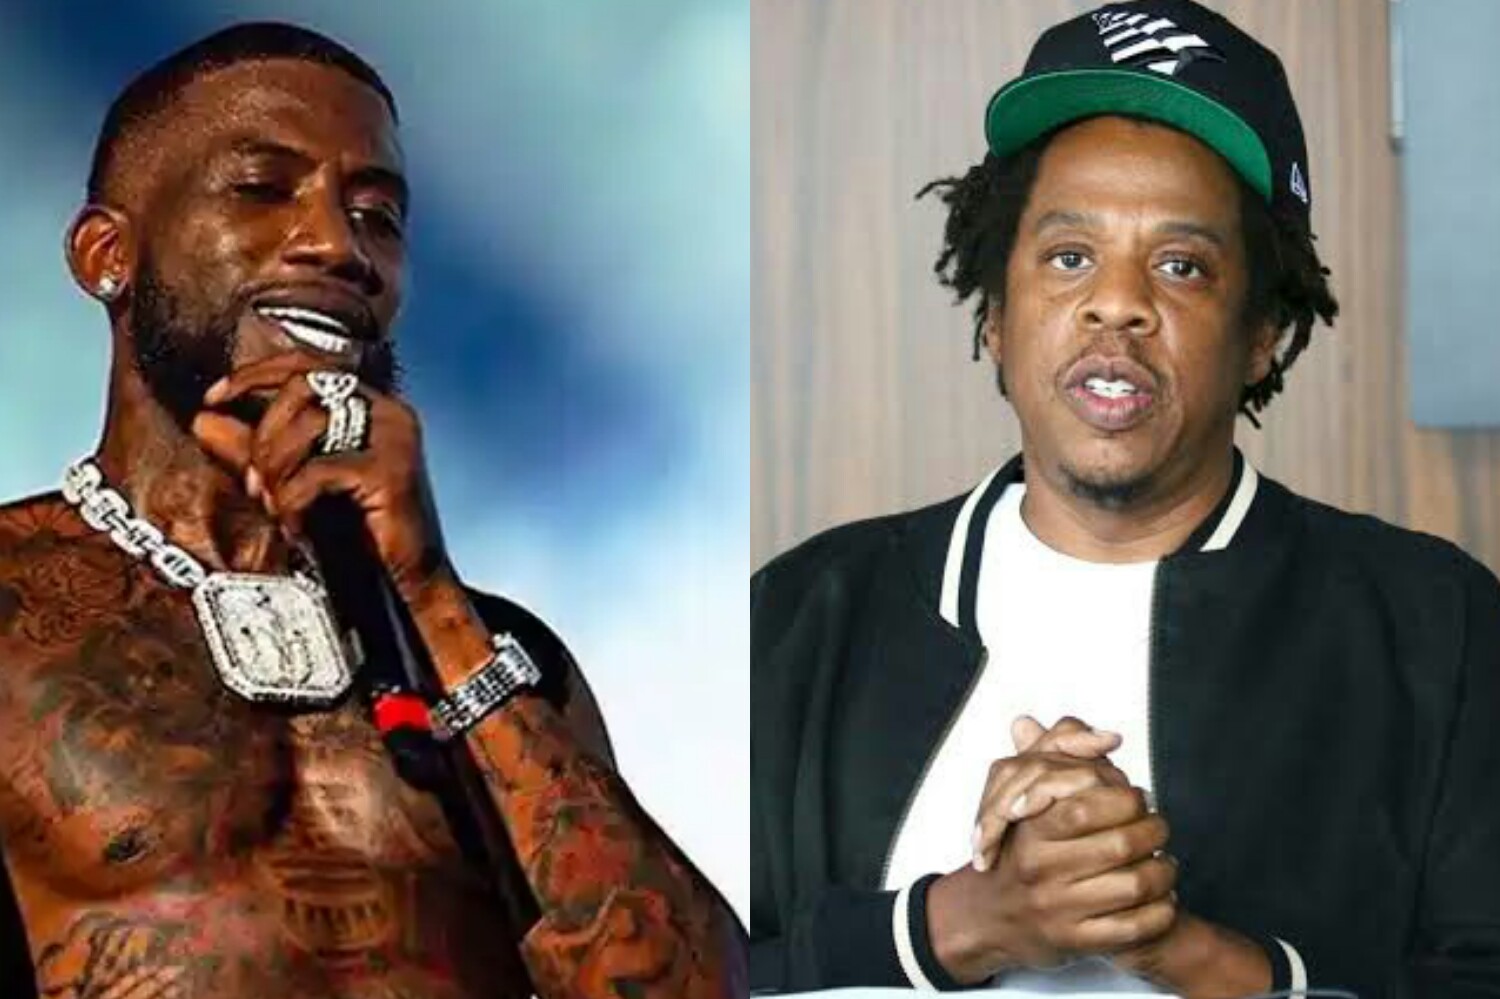 Gucci Mane Beef Jay-Z On Interview, Why He Don't Run Behind Hov